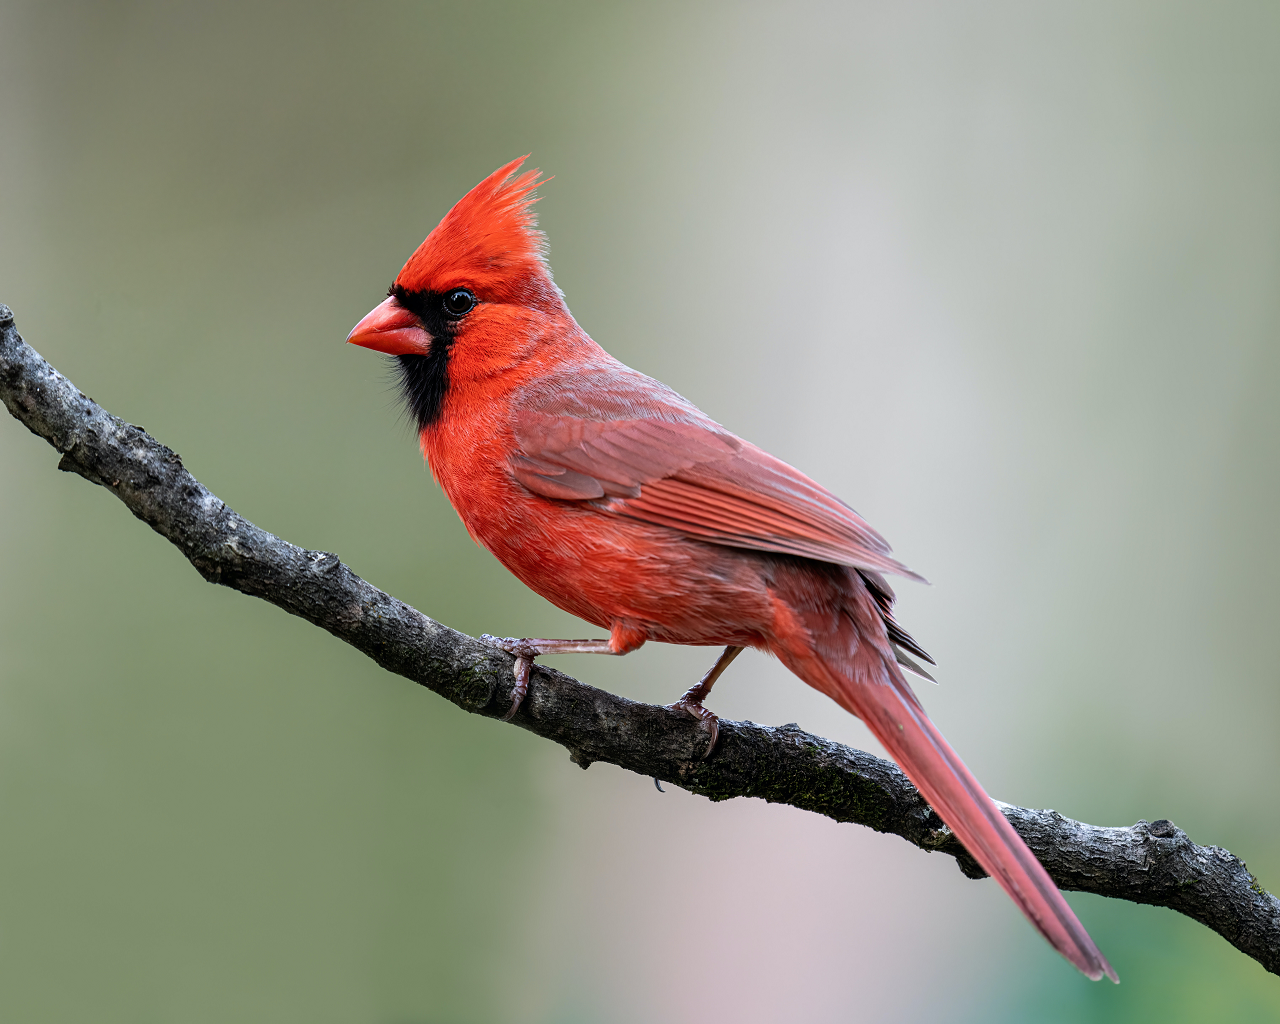 Image of a male cardinal sitting on a branch.